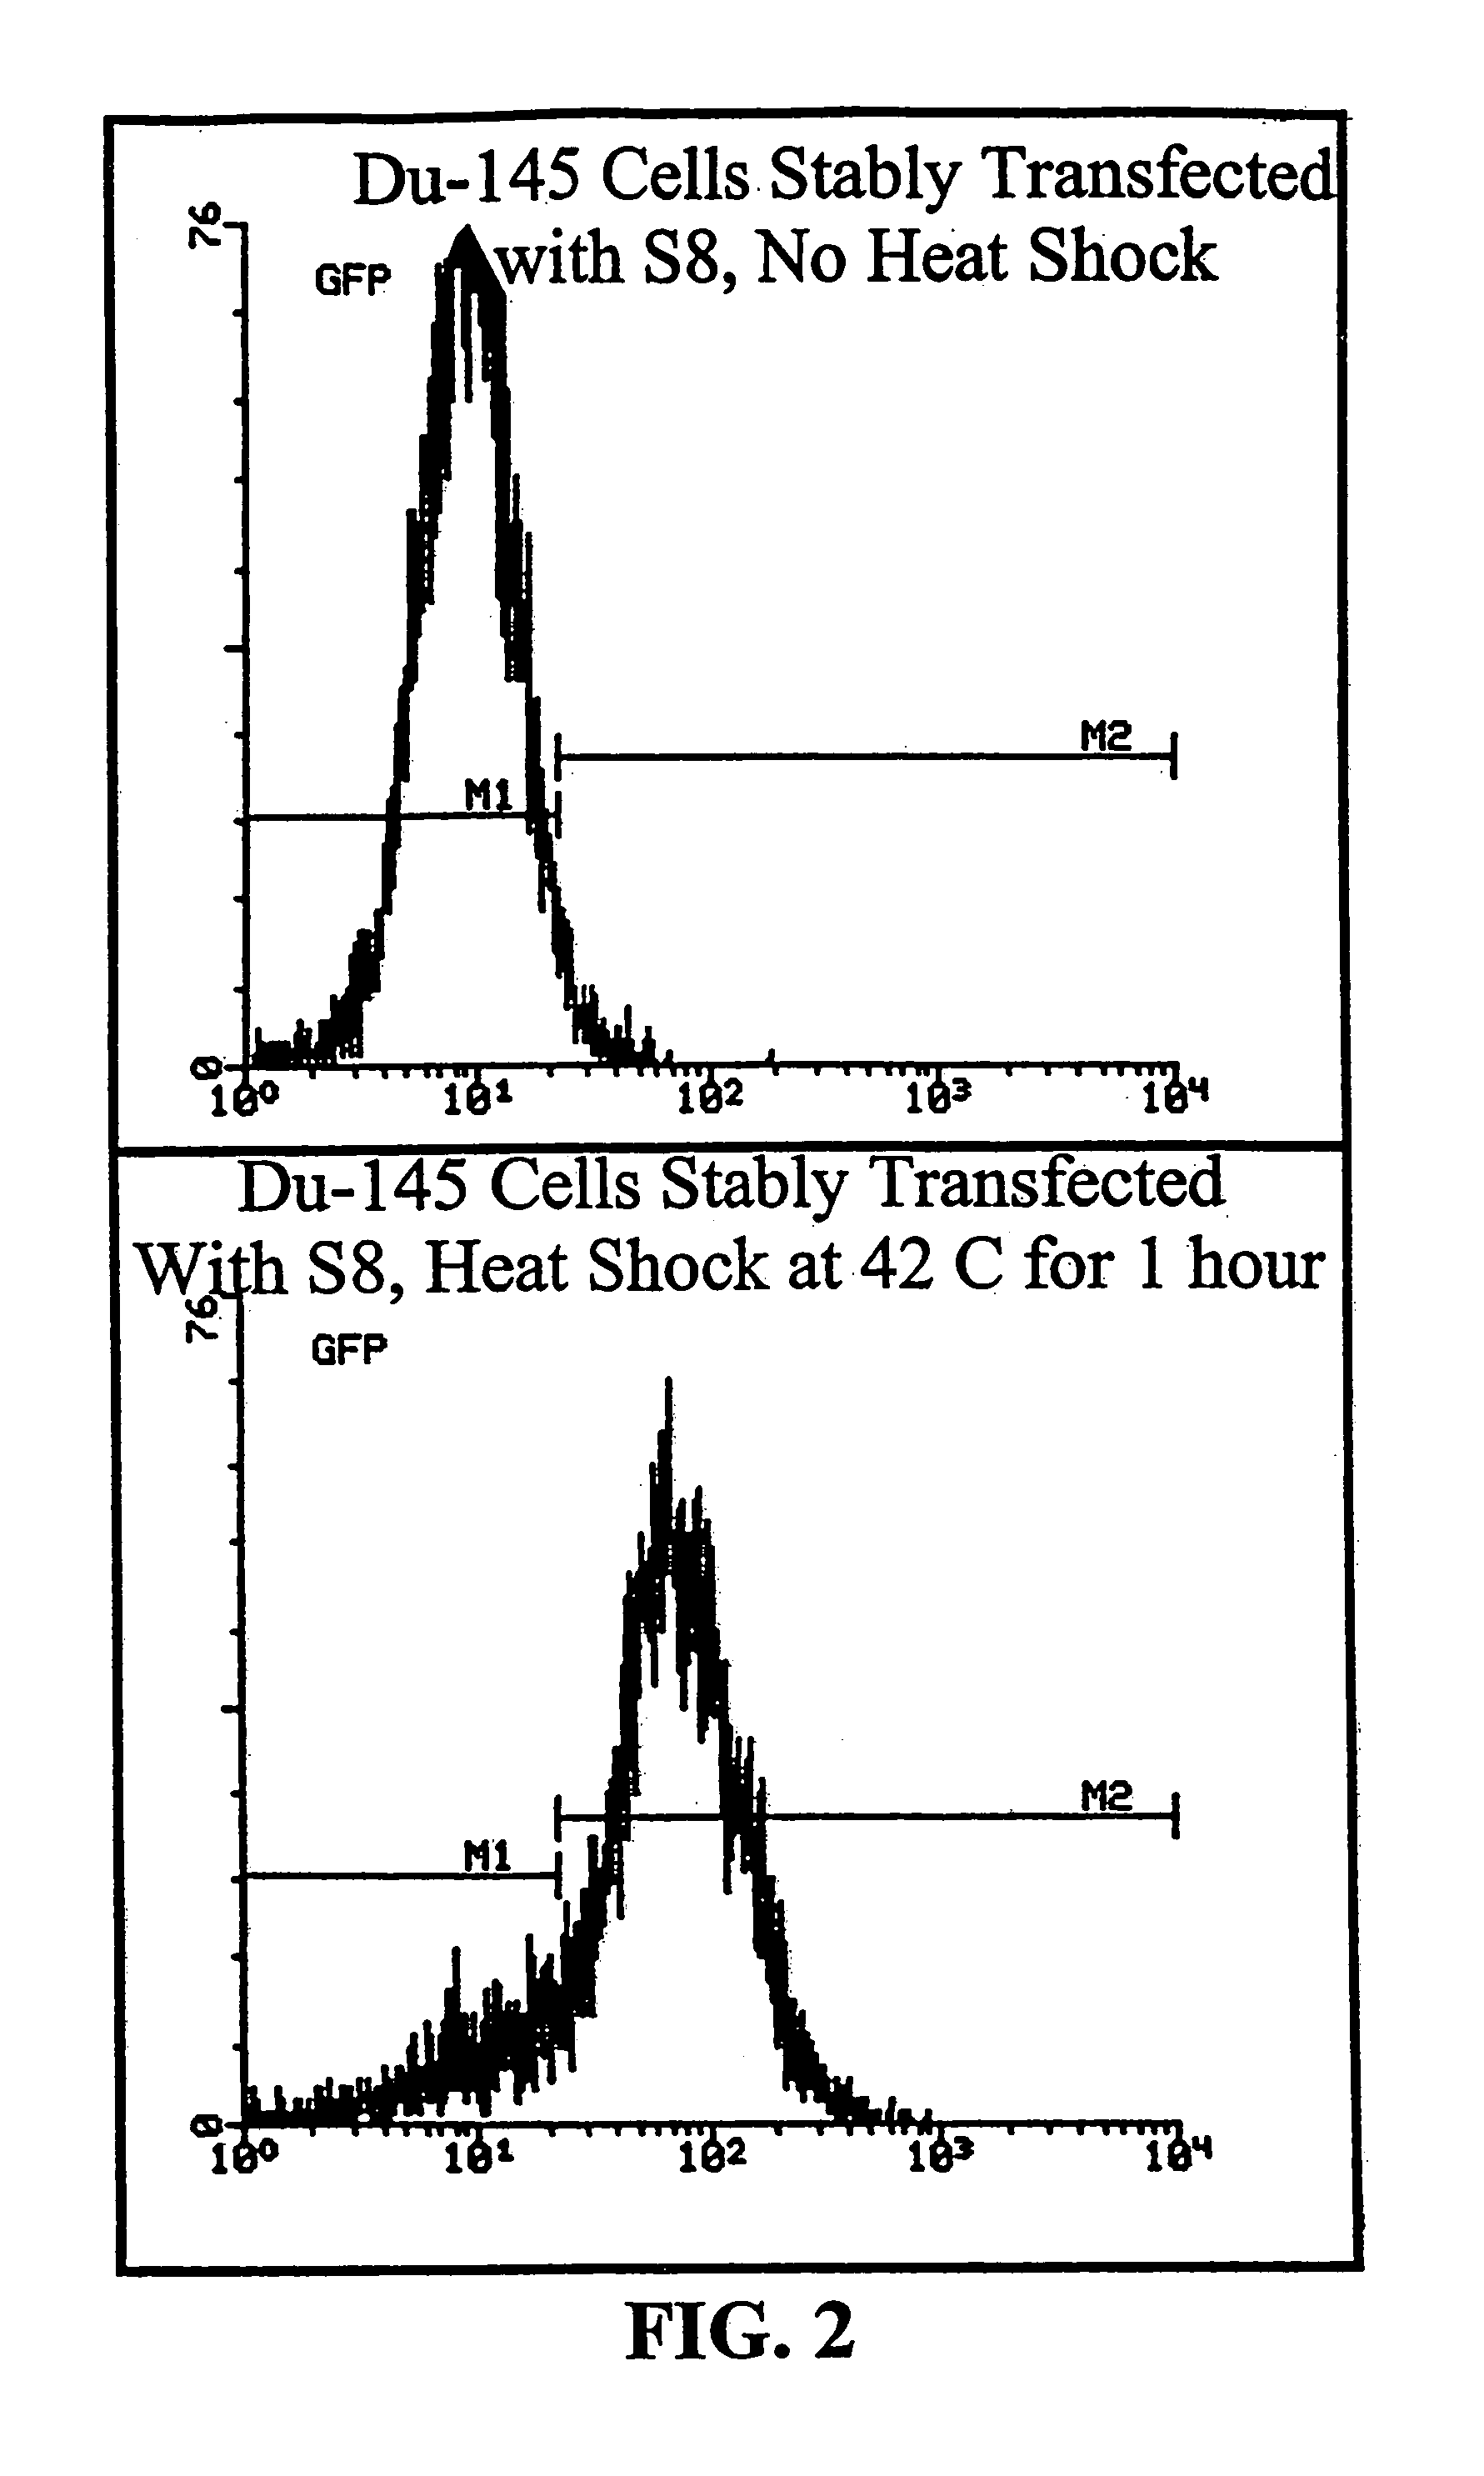 Hyperthermic inducible expression vectors for gene therapy and methods of use thereof